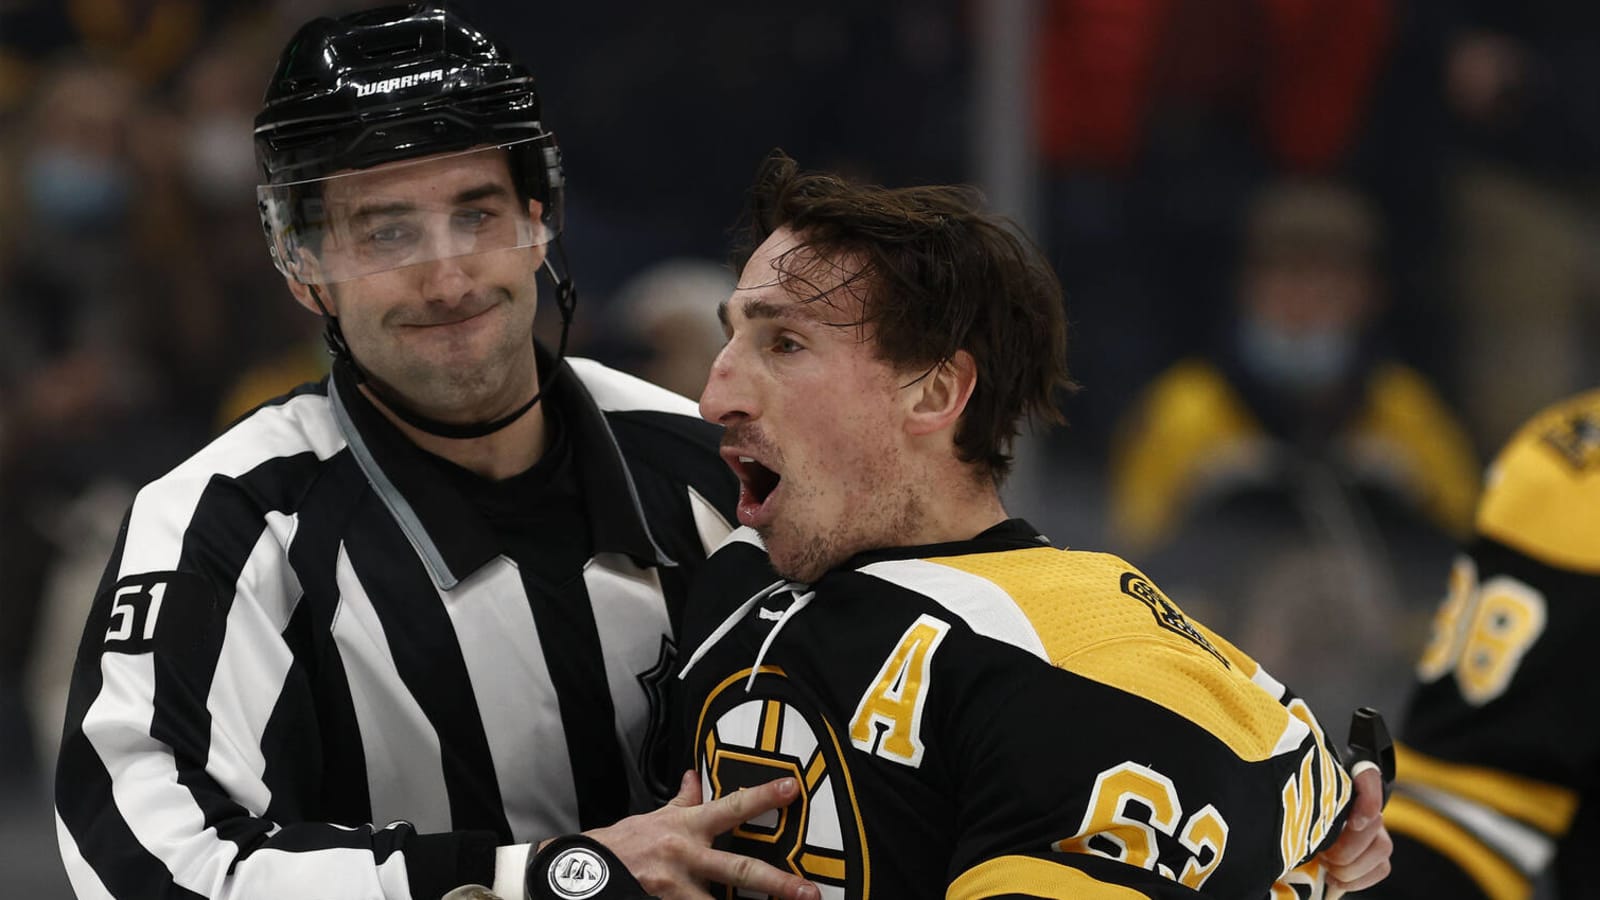 NHLPA files appeal on behalf of Bruins star Brad Marchand